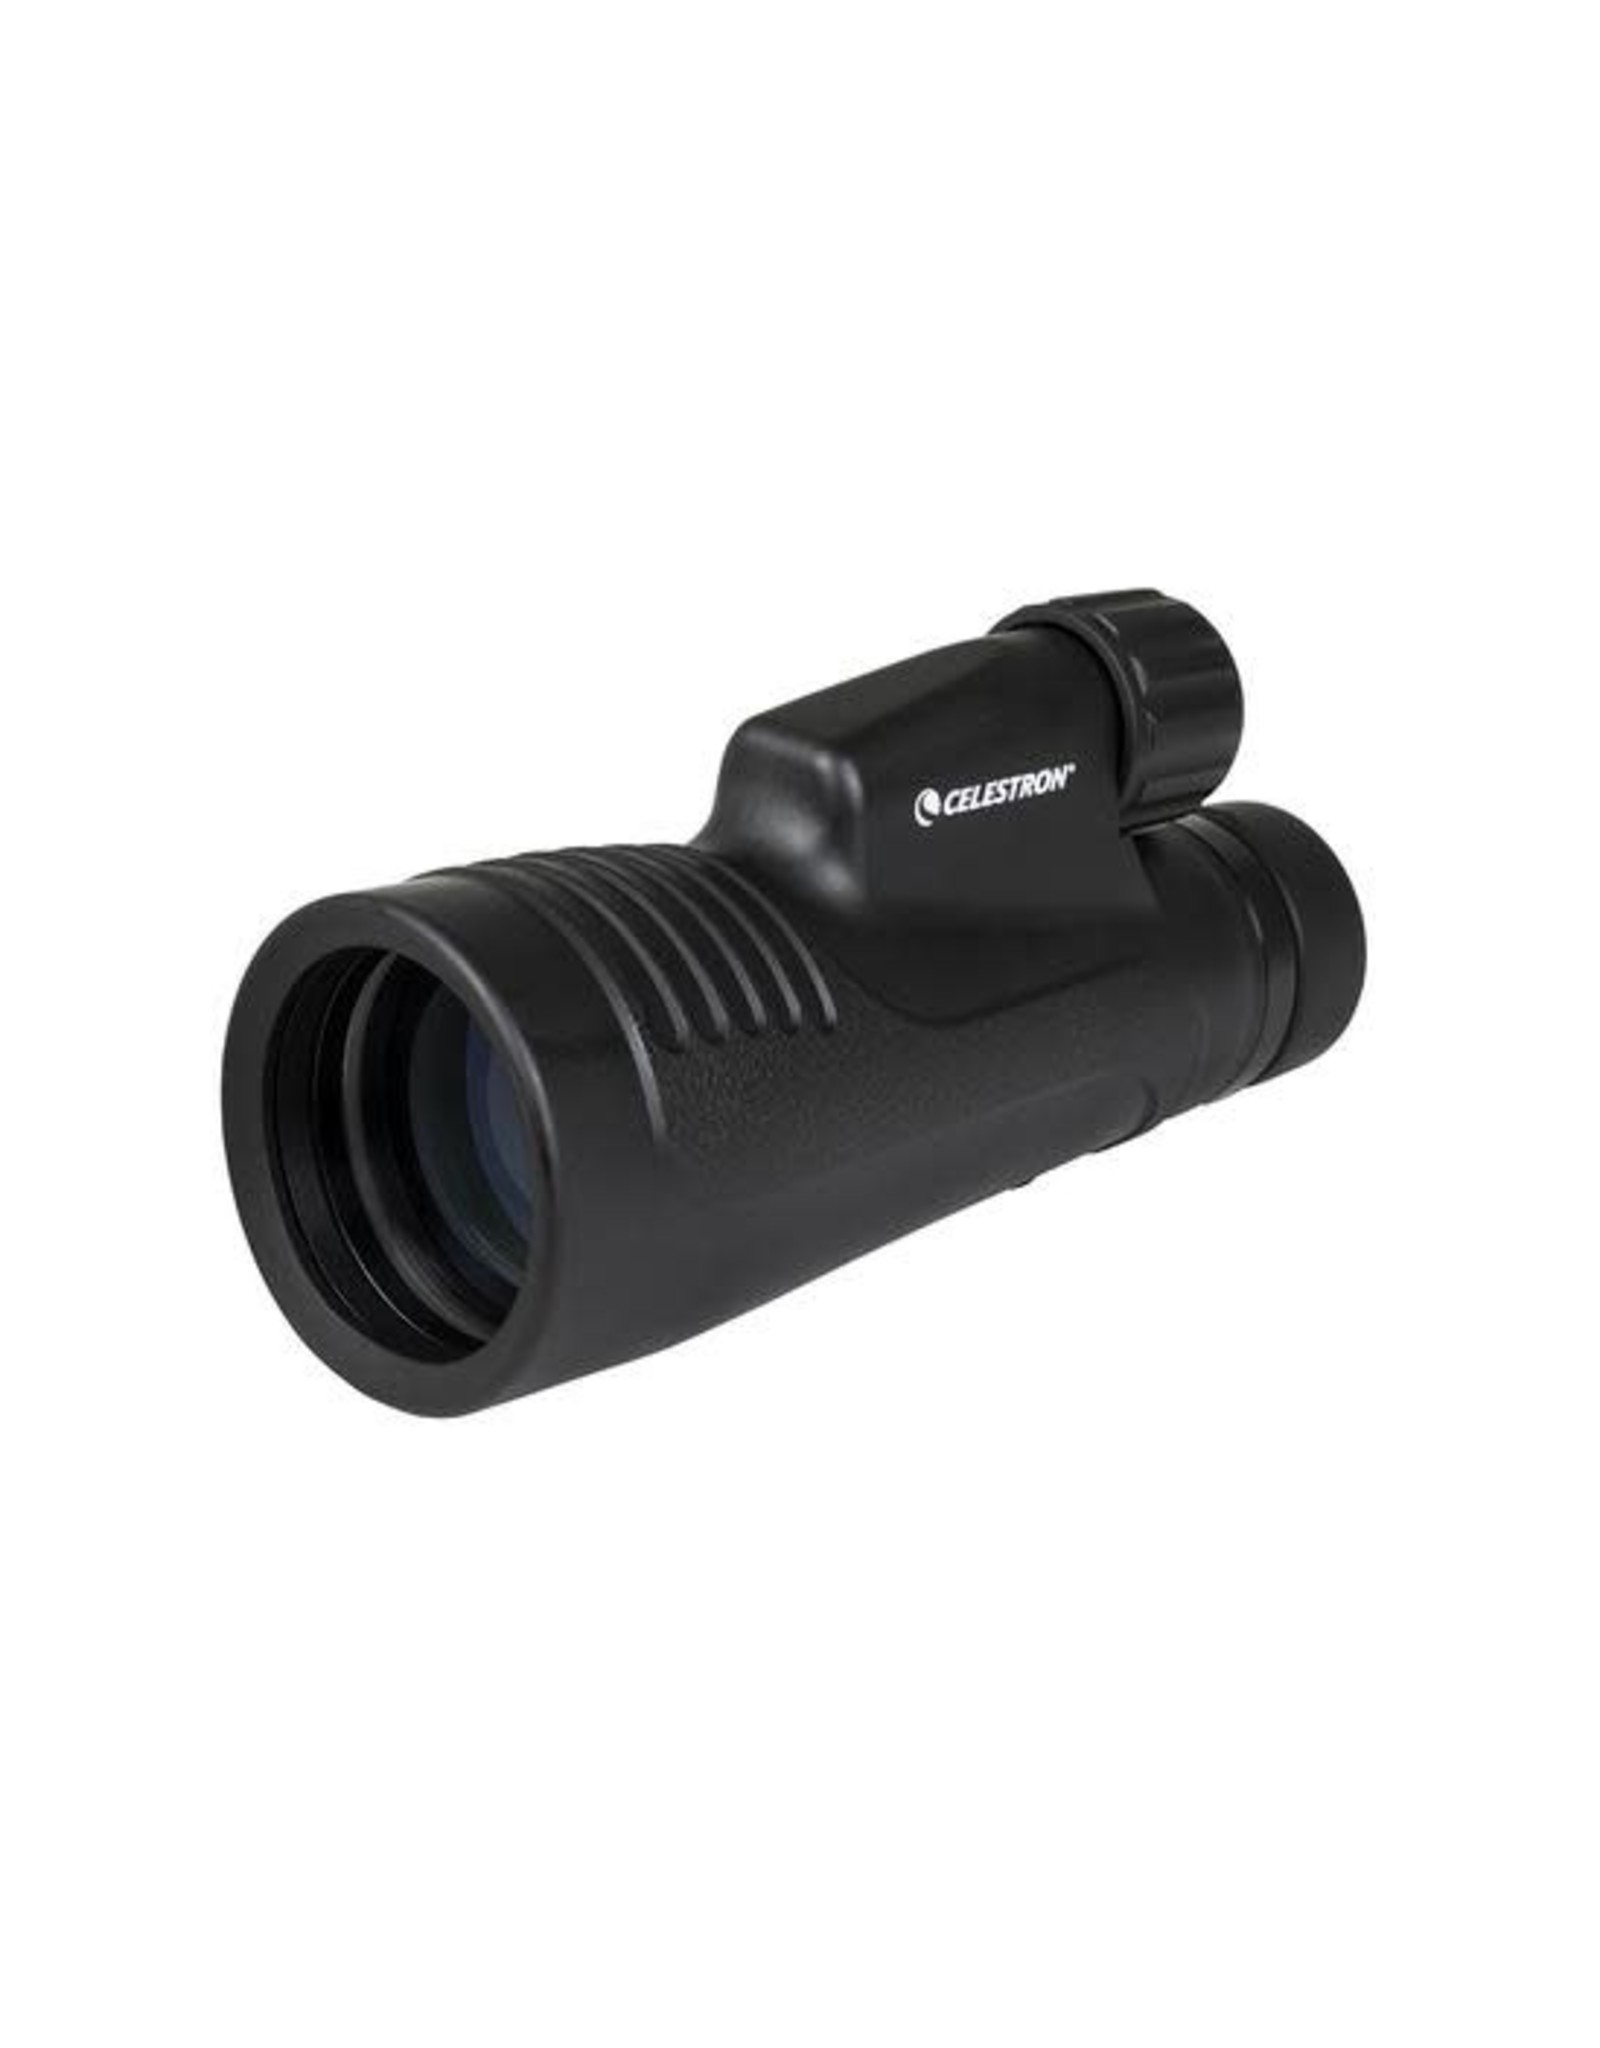 Celestron Celestron 15x50mm Outland X Monocular with Smartphone Adapter (LIMITED QUANTITIES!)